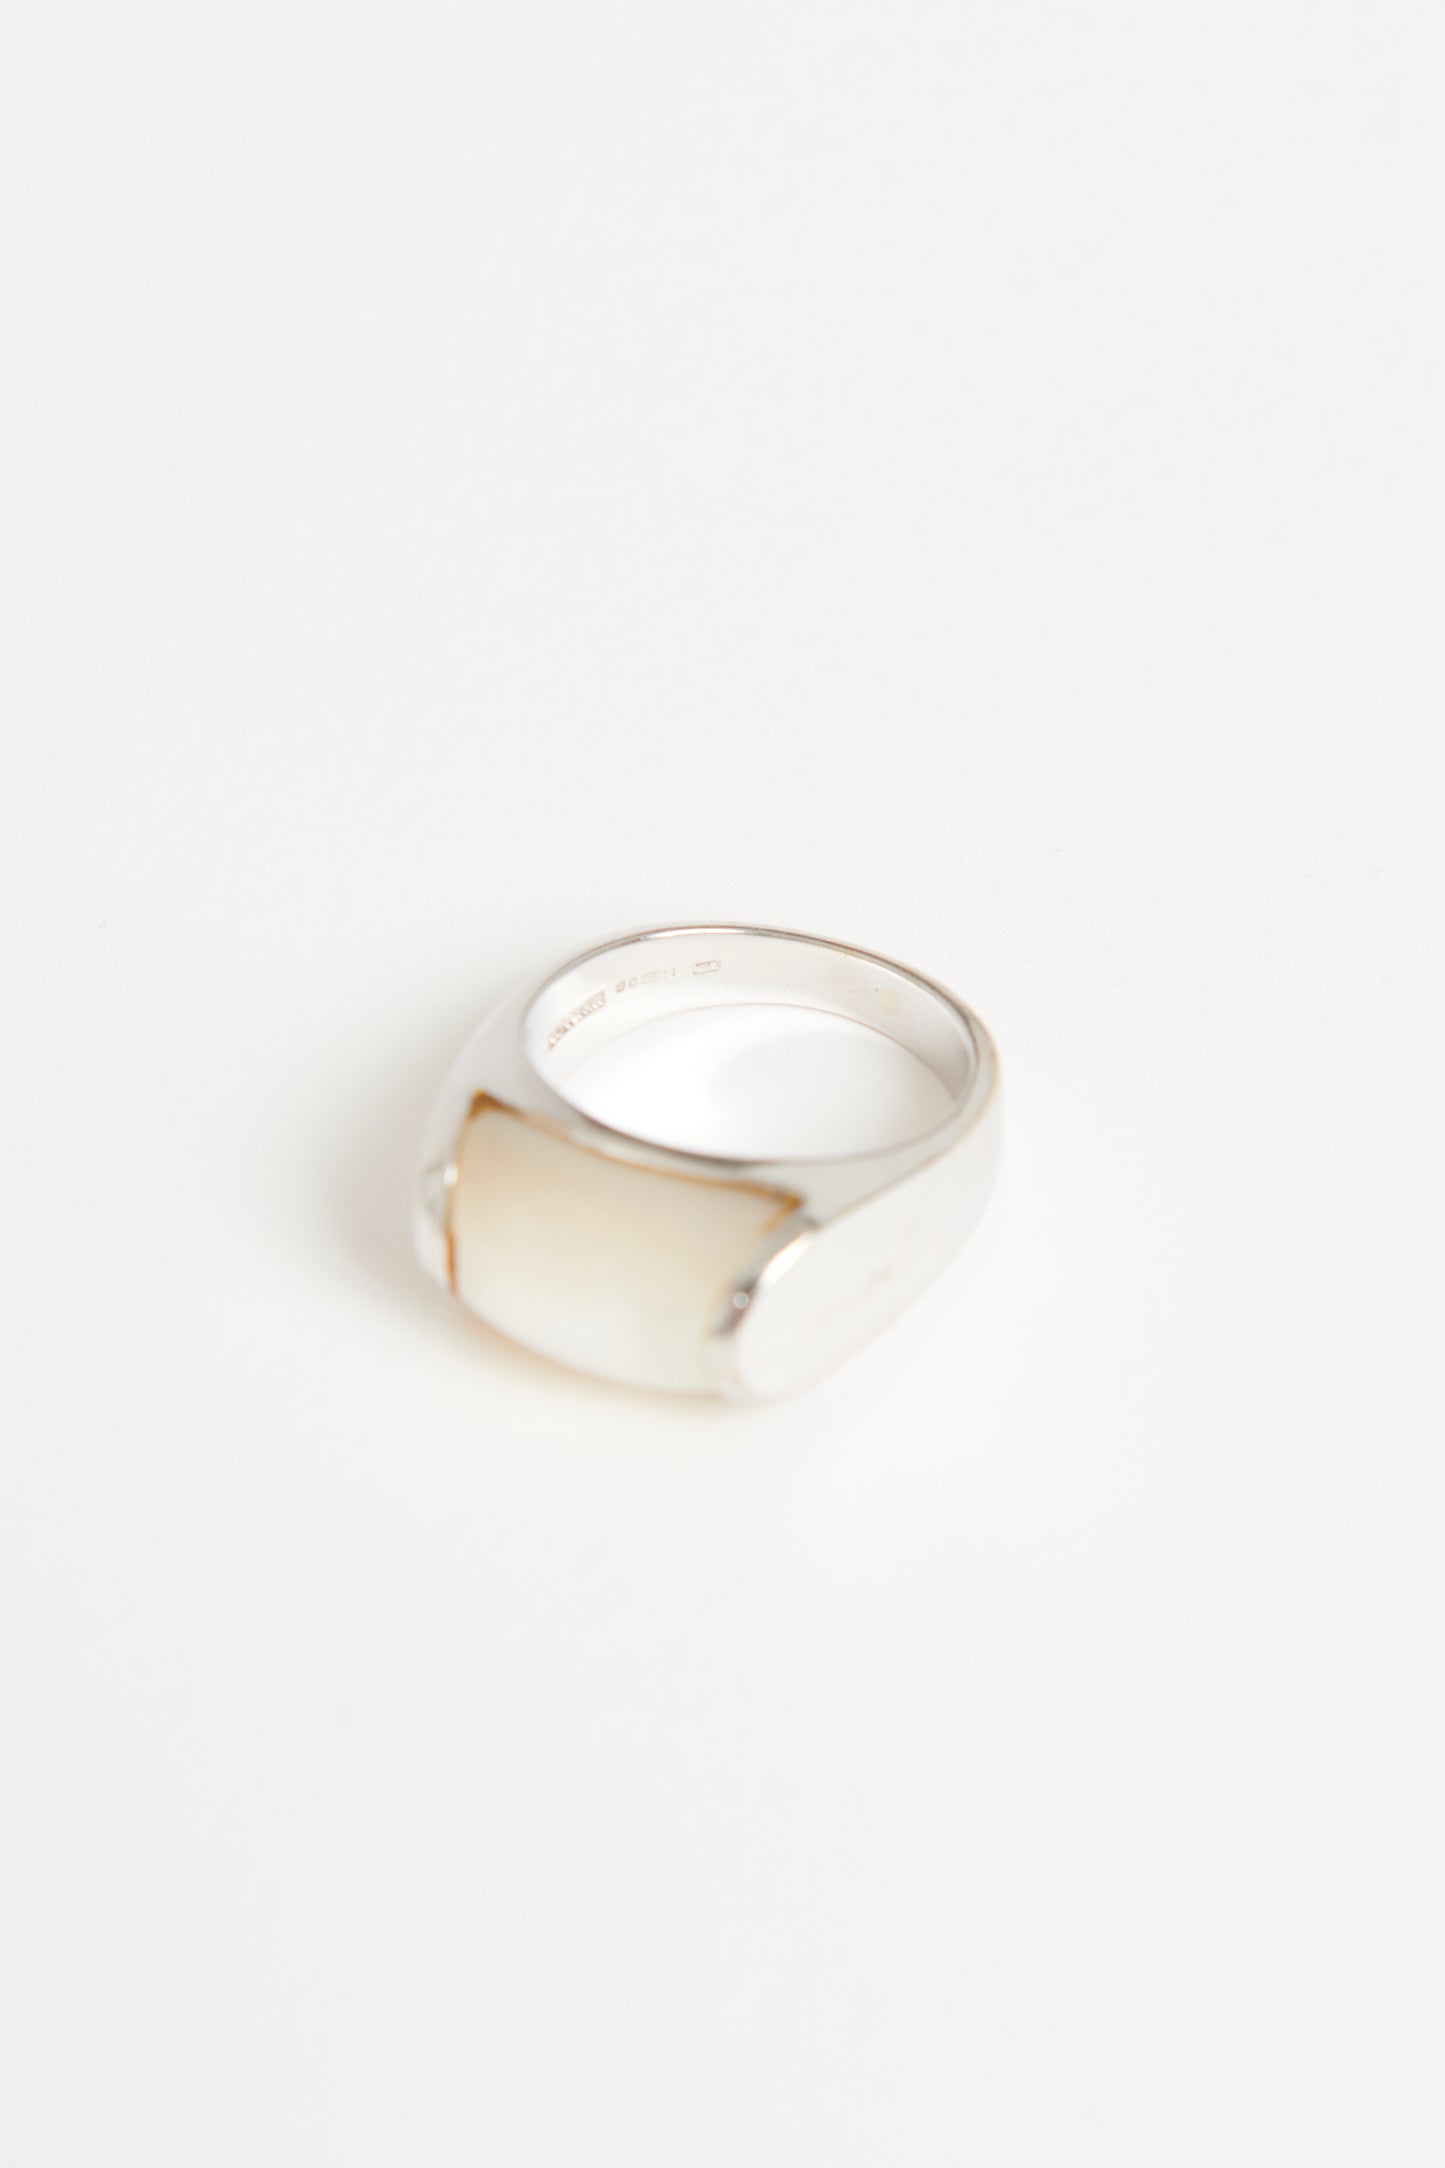 Bvlgari Tronchetto Mother of Pearl Preowned Ring